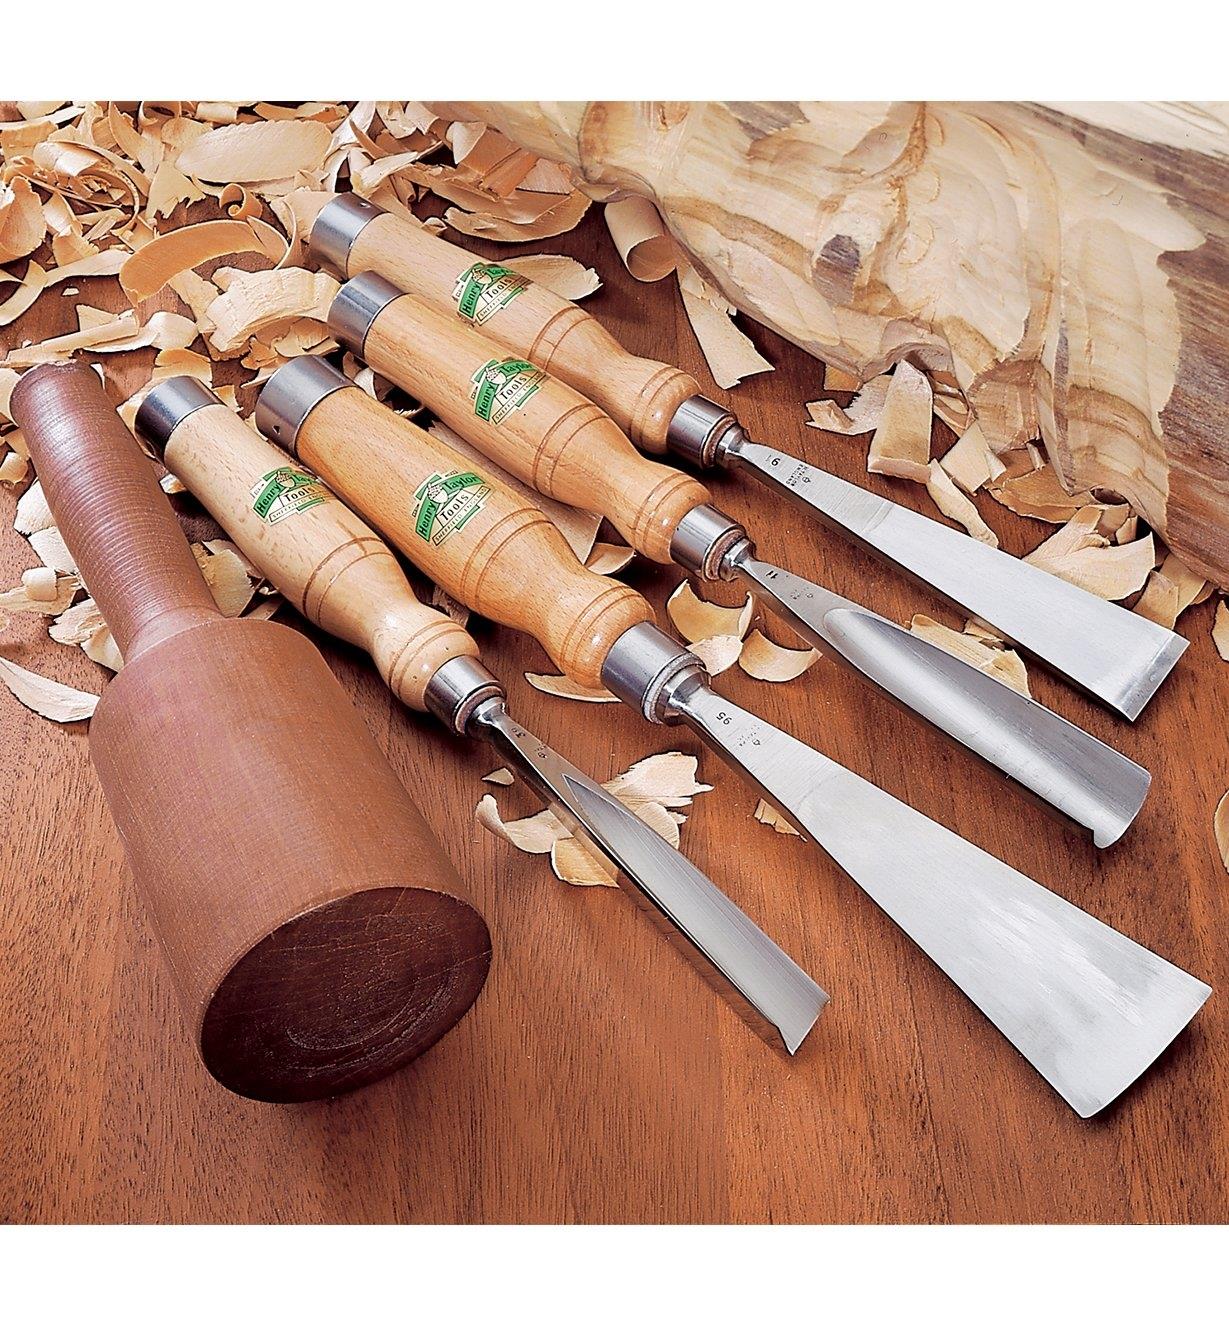 Sculpting Tools lying between a wood carving and a mallet with shavings around